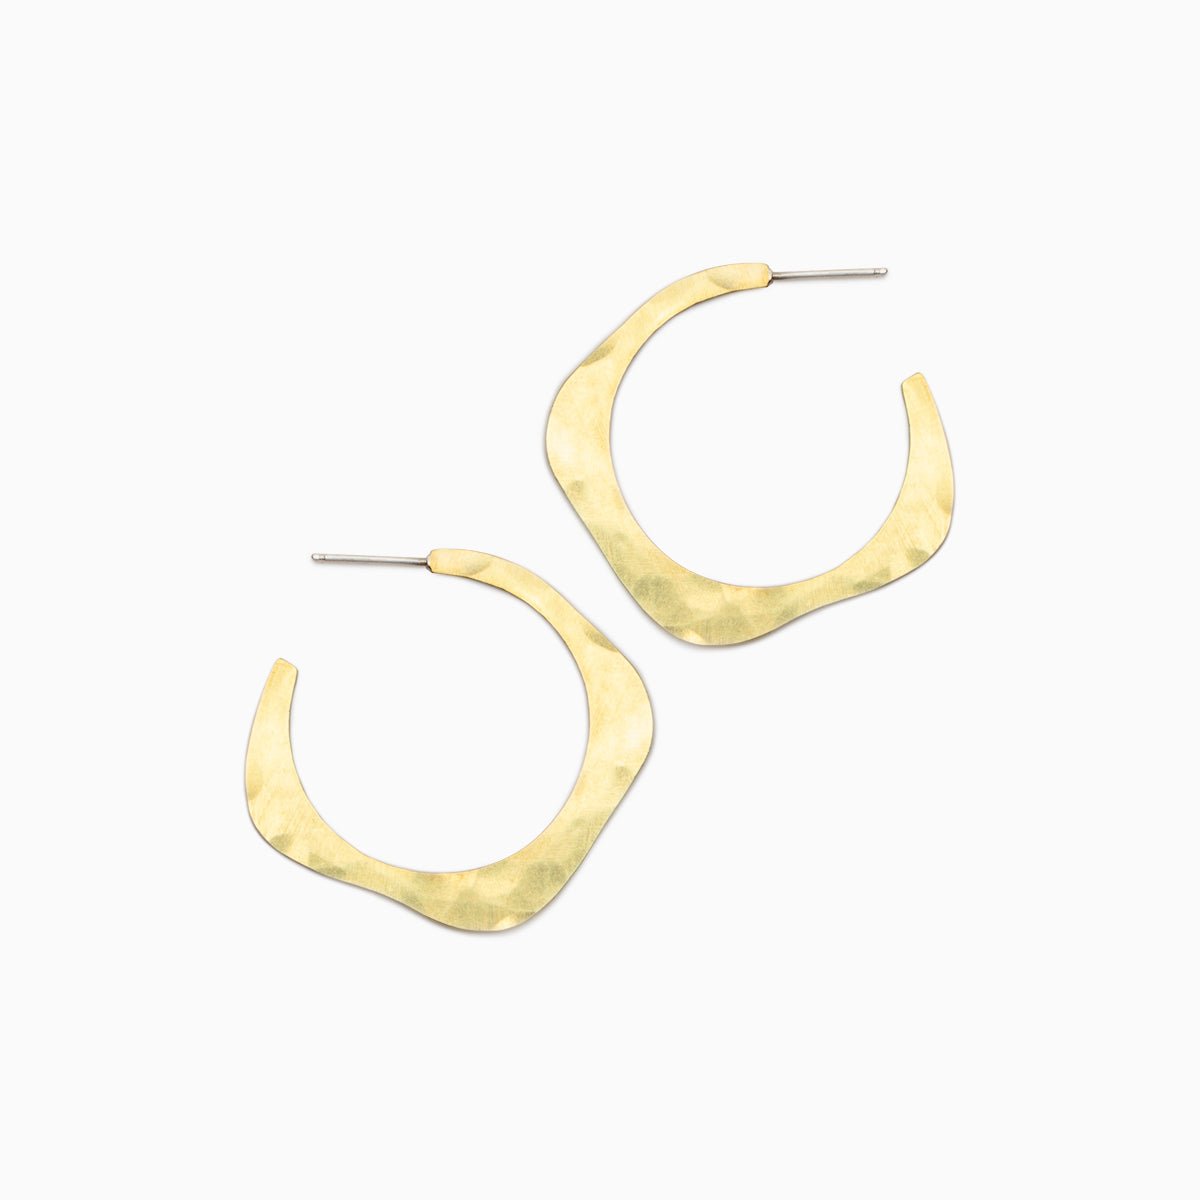 A brass hoop earring in a wave design with a hand hammered texture and sterling silver earring posts. The small Doble Hoop Earrings are designed and handcrafted in Portland, Oregon.